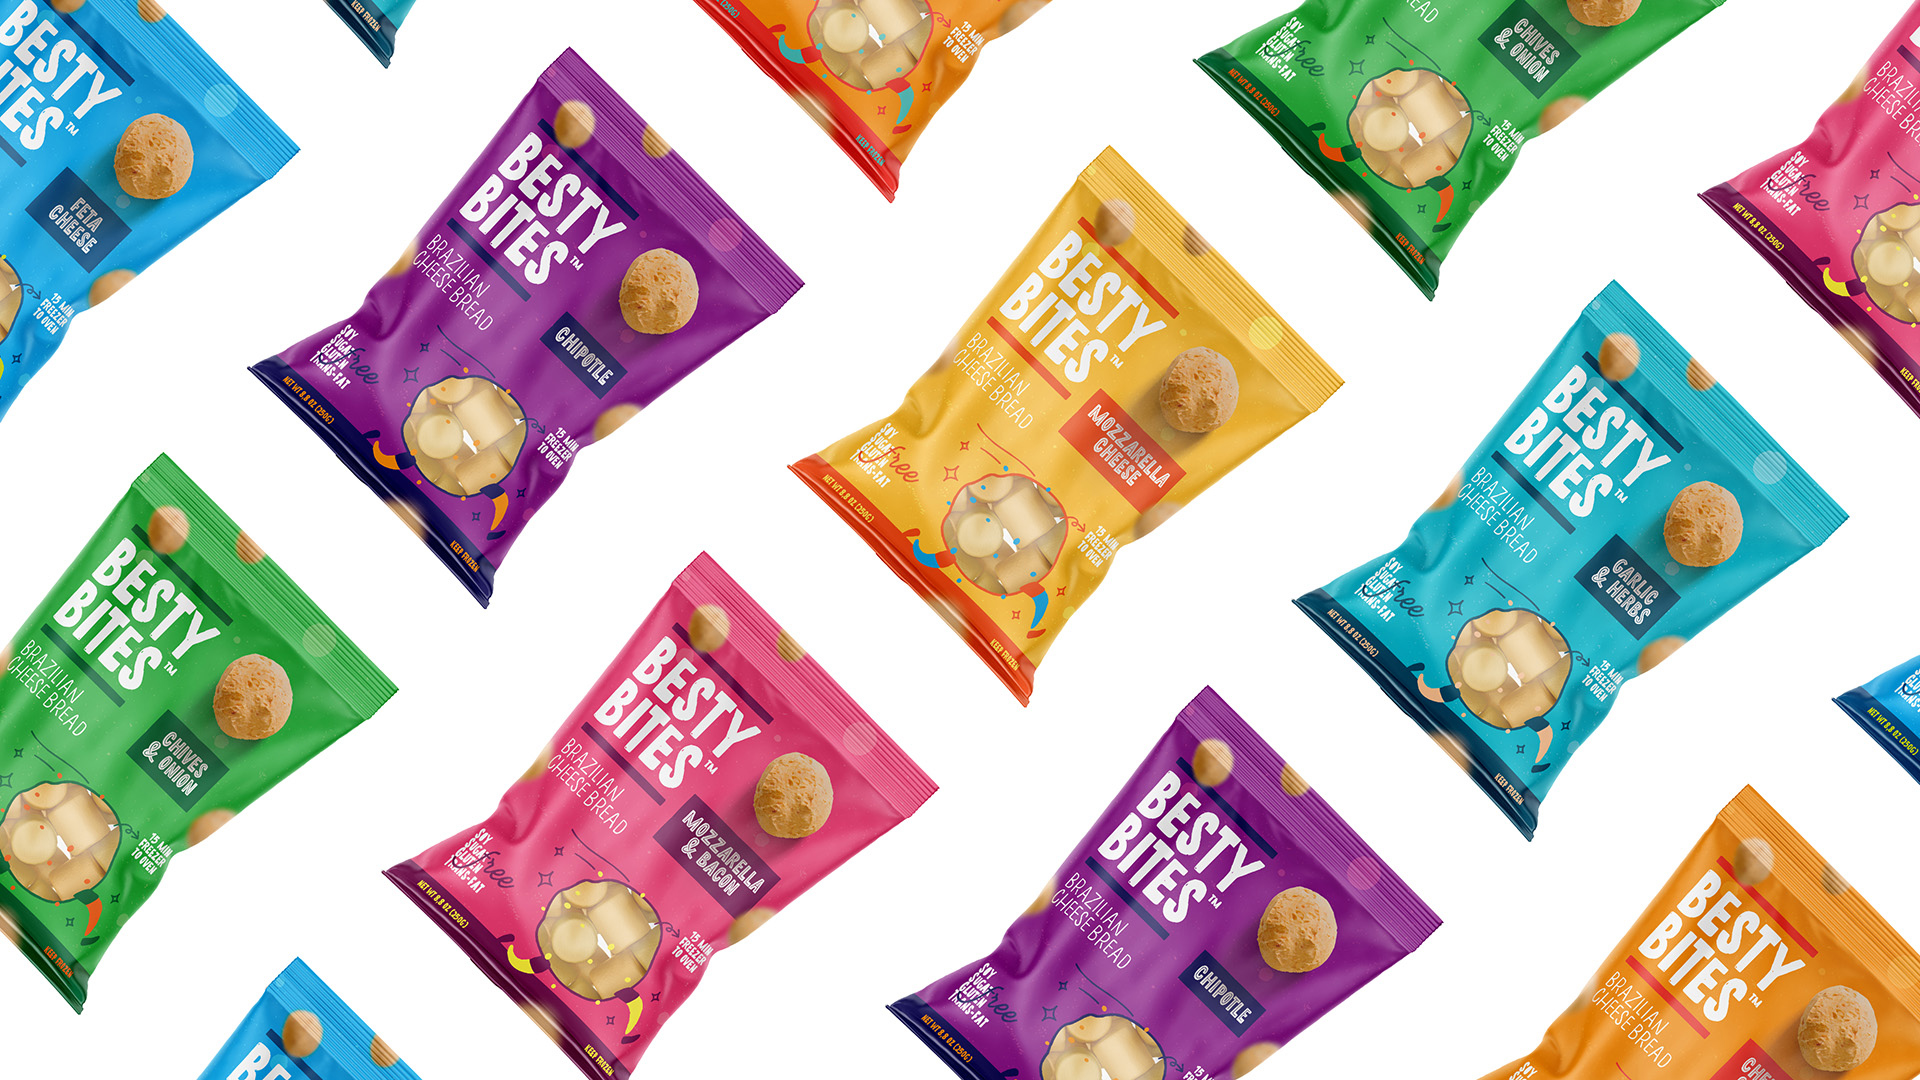 Feitoria Creates Packages for Brazilian Snacks Sold in the United States